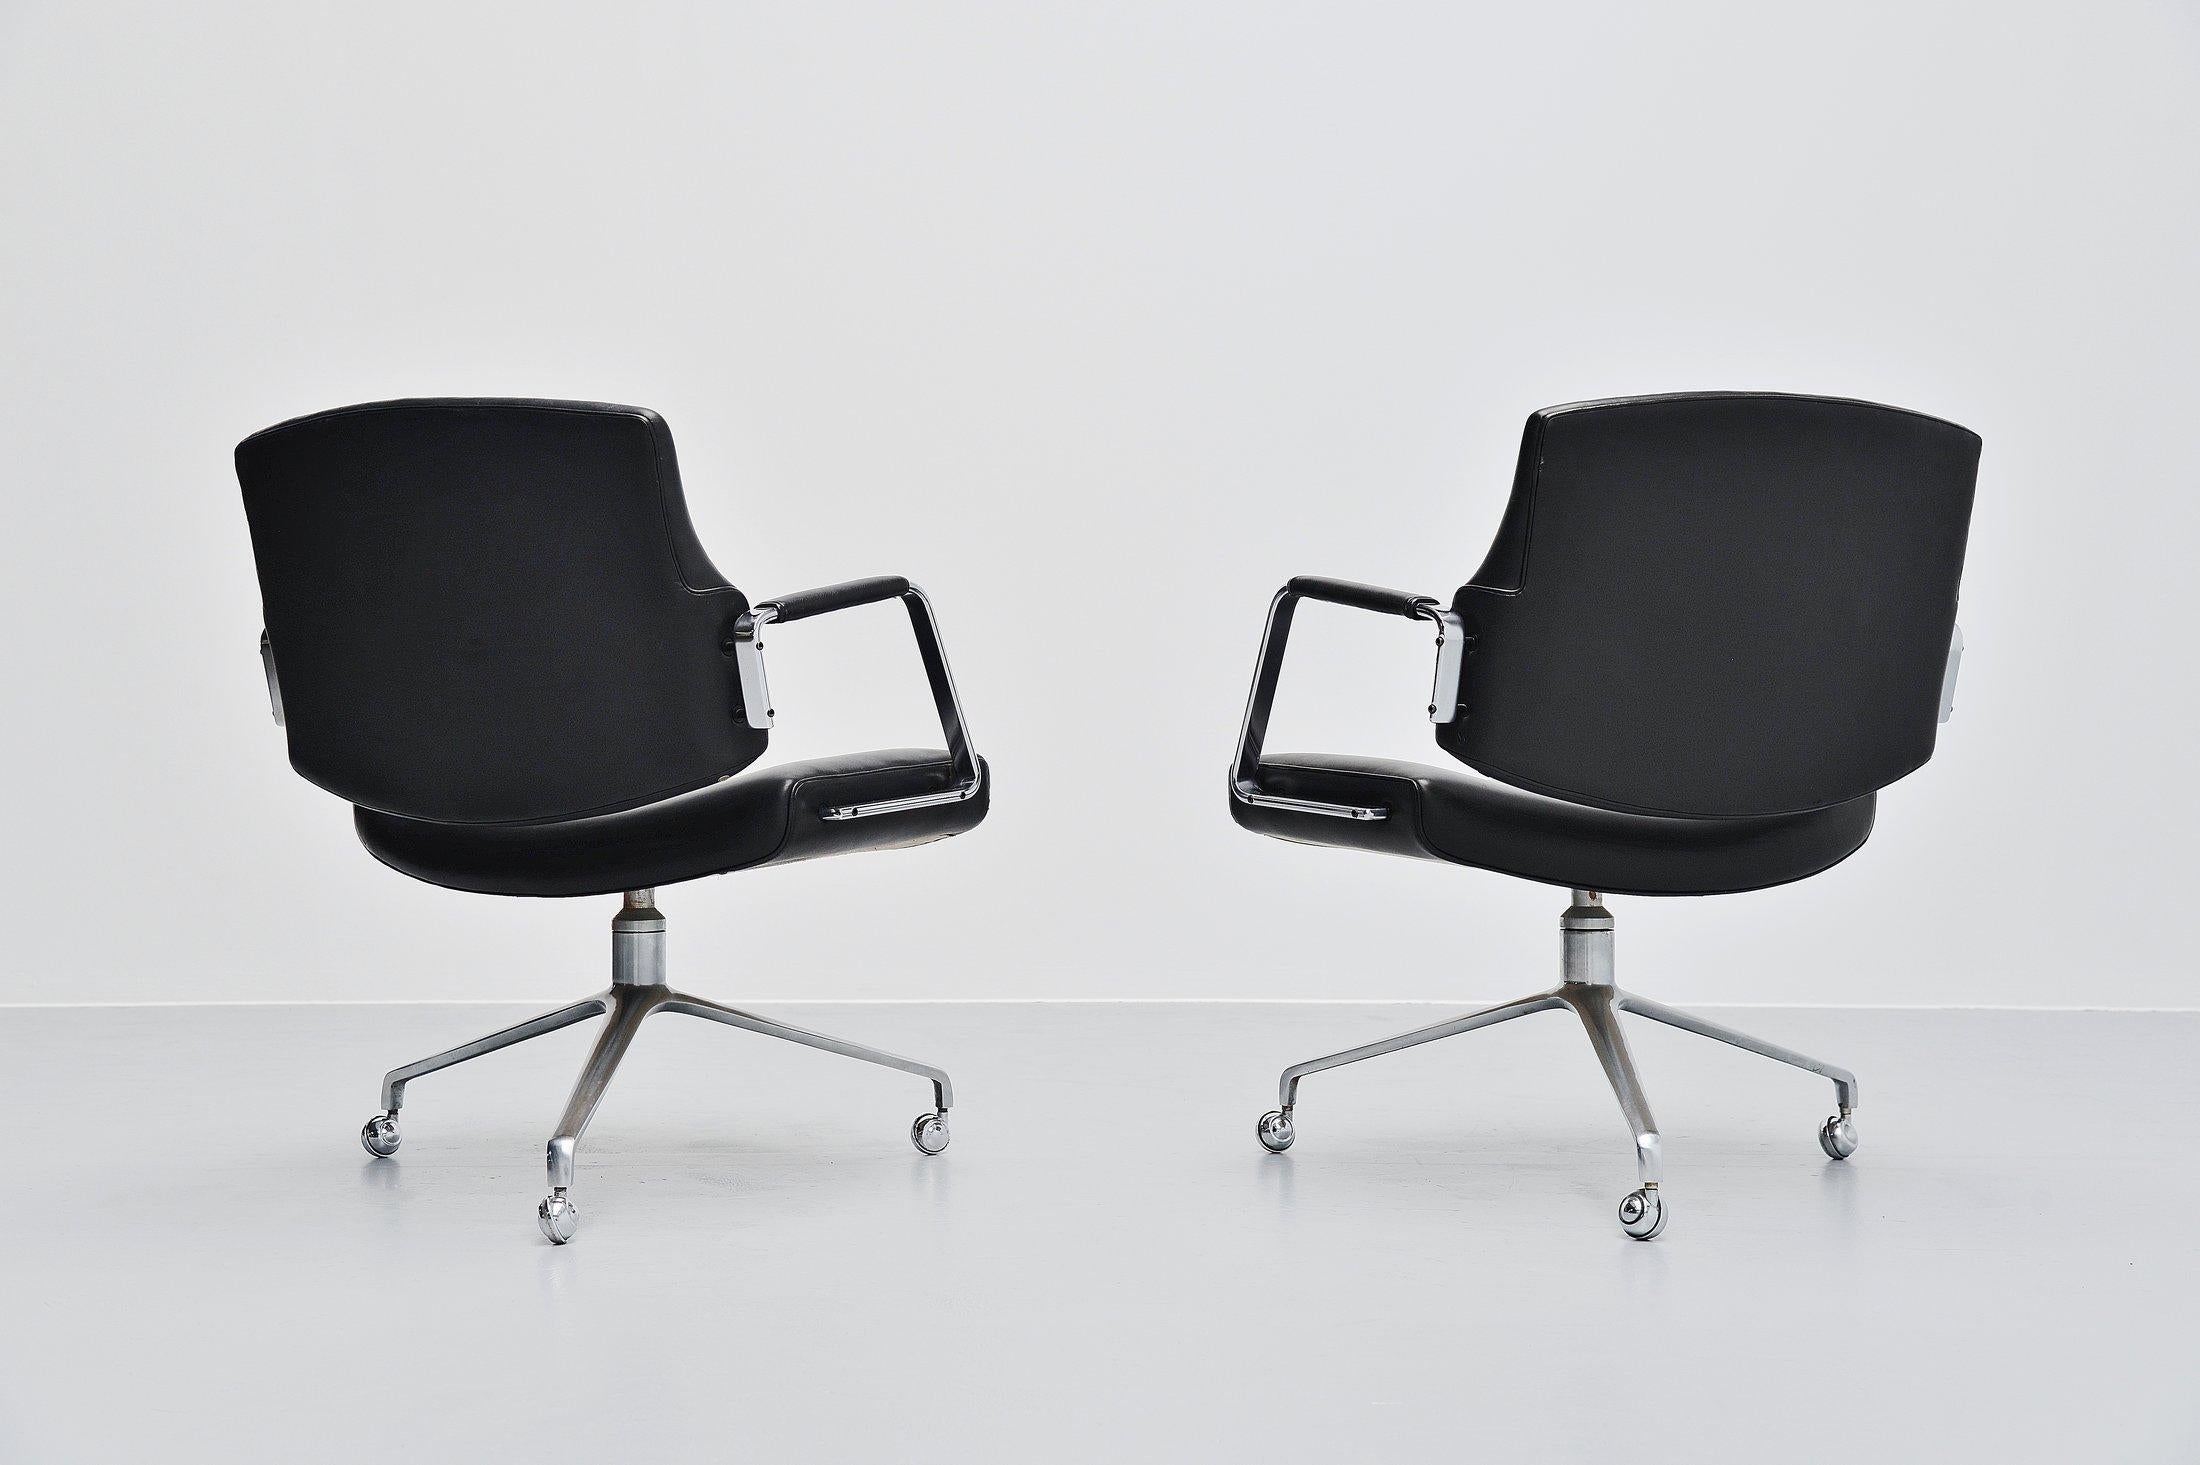 Fantastic office / desk chair model FK84 designed by Preben Fabricius and Jorgen Kastholm and manufactures by Kill International, Germany, 1968. The chairs have solid steel frames and are matte chrome-plated. The chairs have high quality wheels and